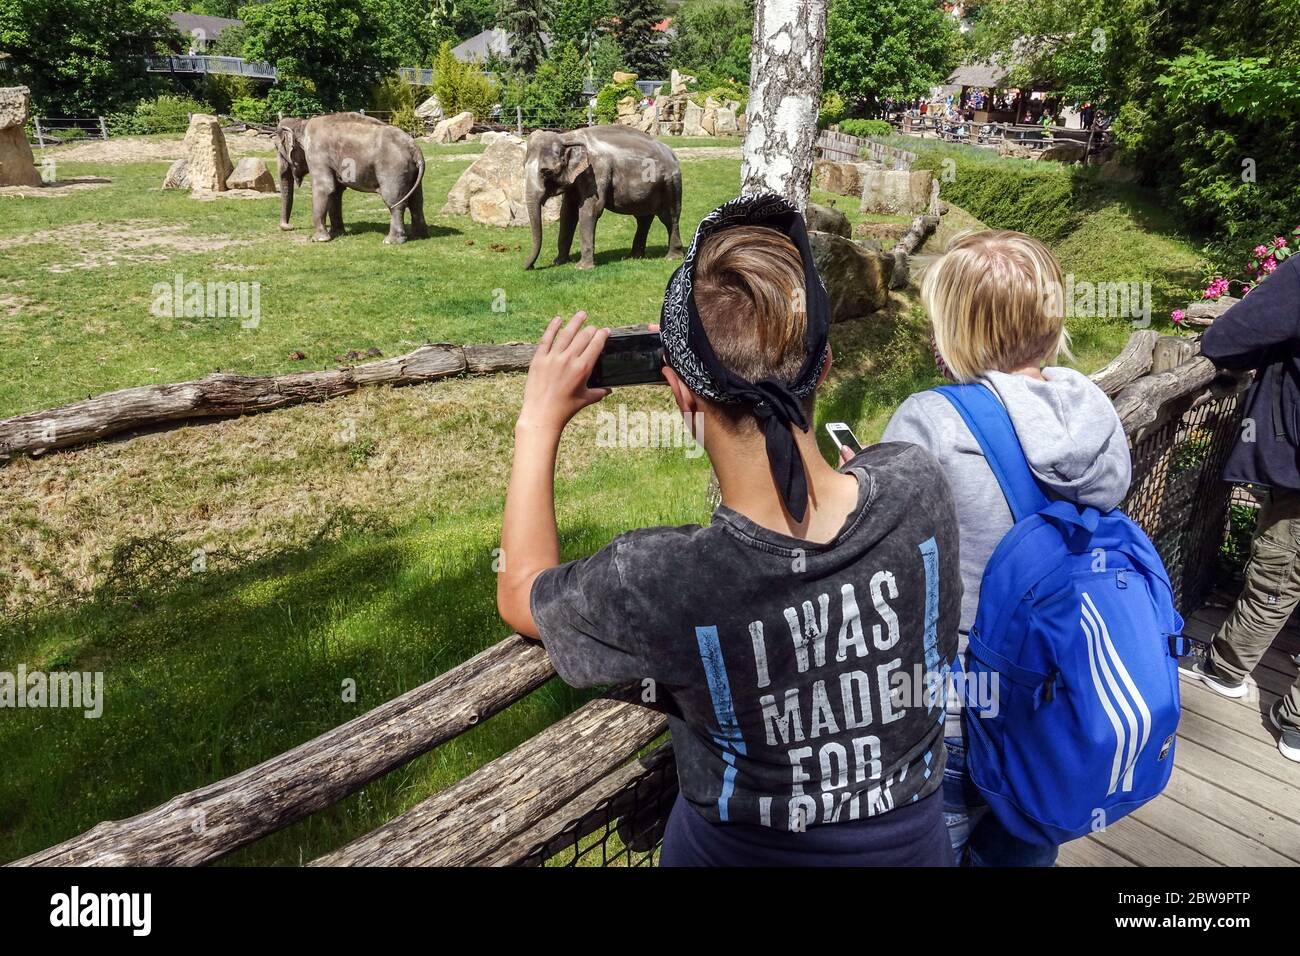 People and visitors look at the elephants at Prague Zoo, a good event for a day trip for family with children Czech Republic  daily life zoo animals people Stock Photo